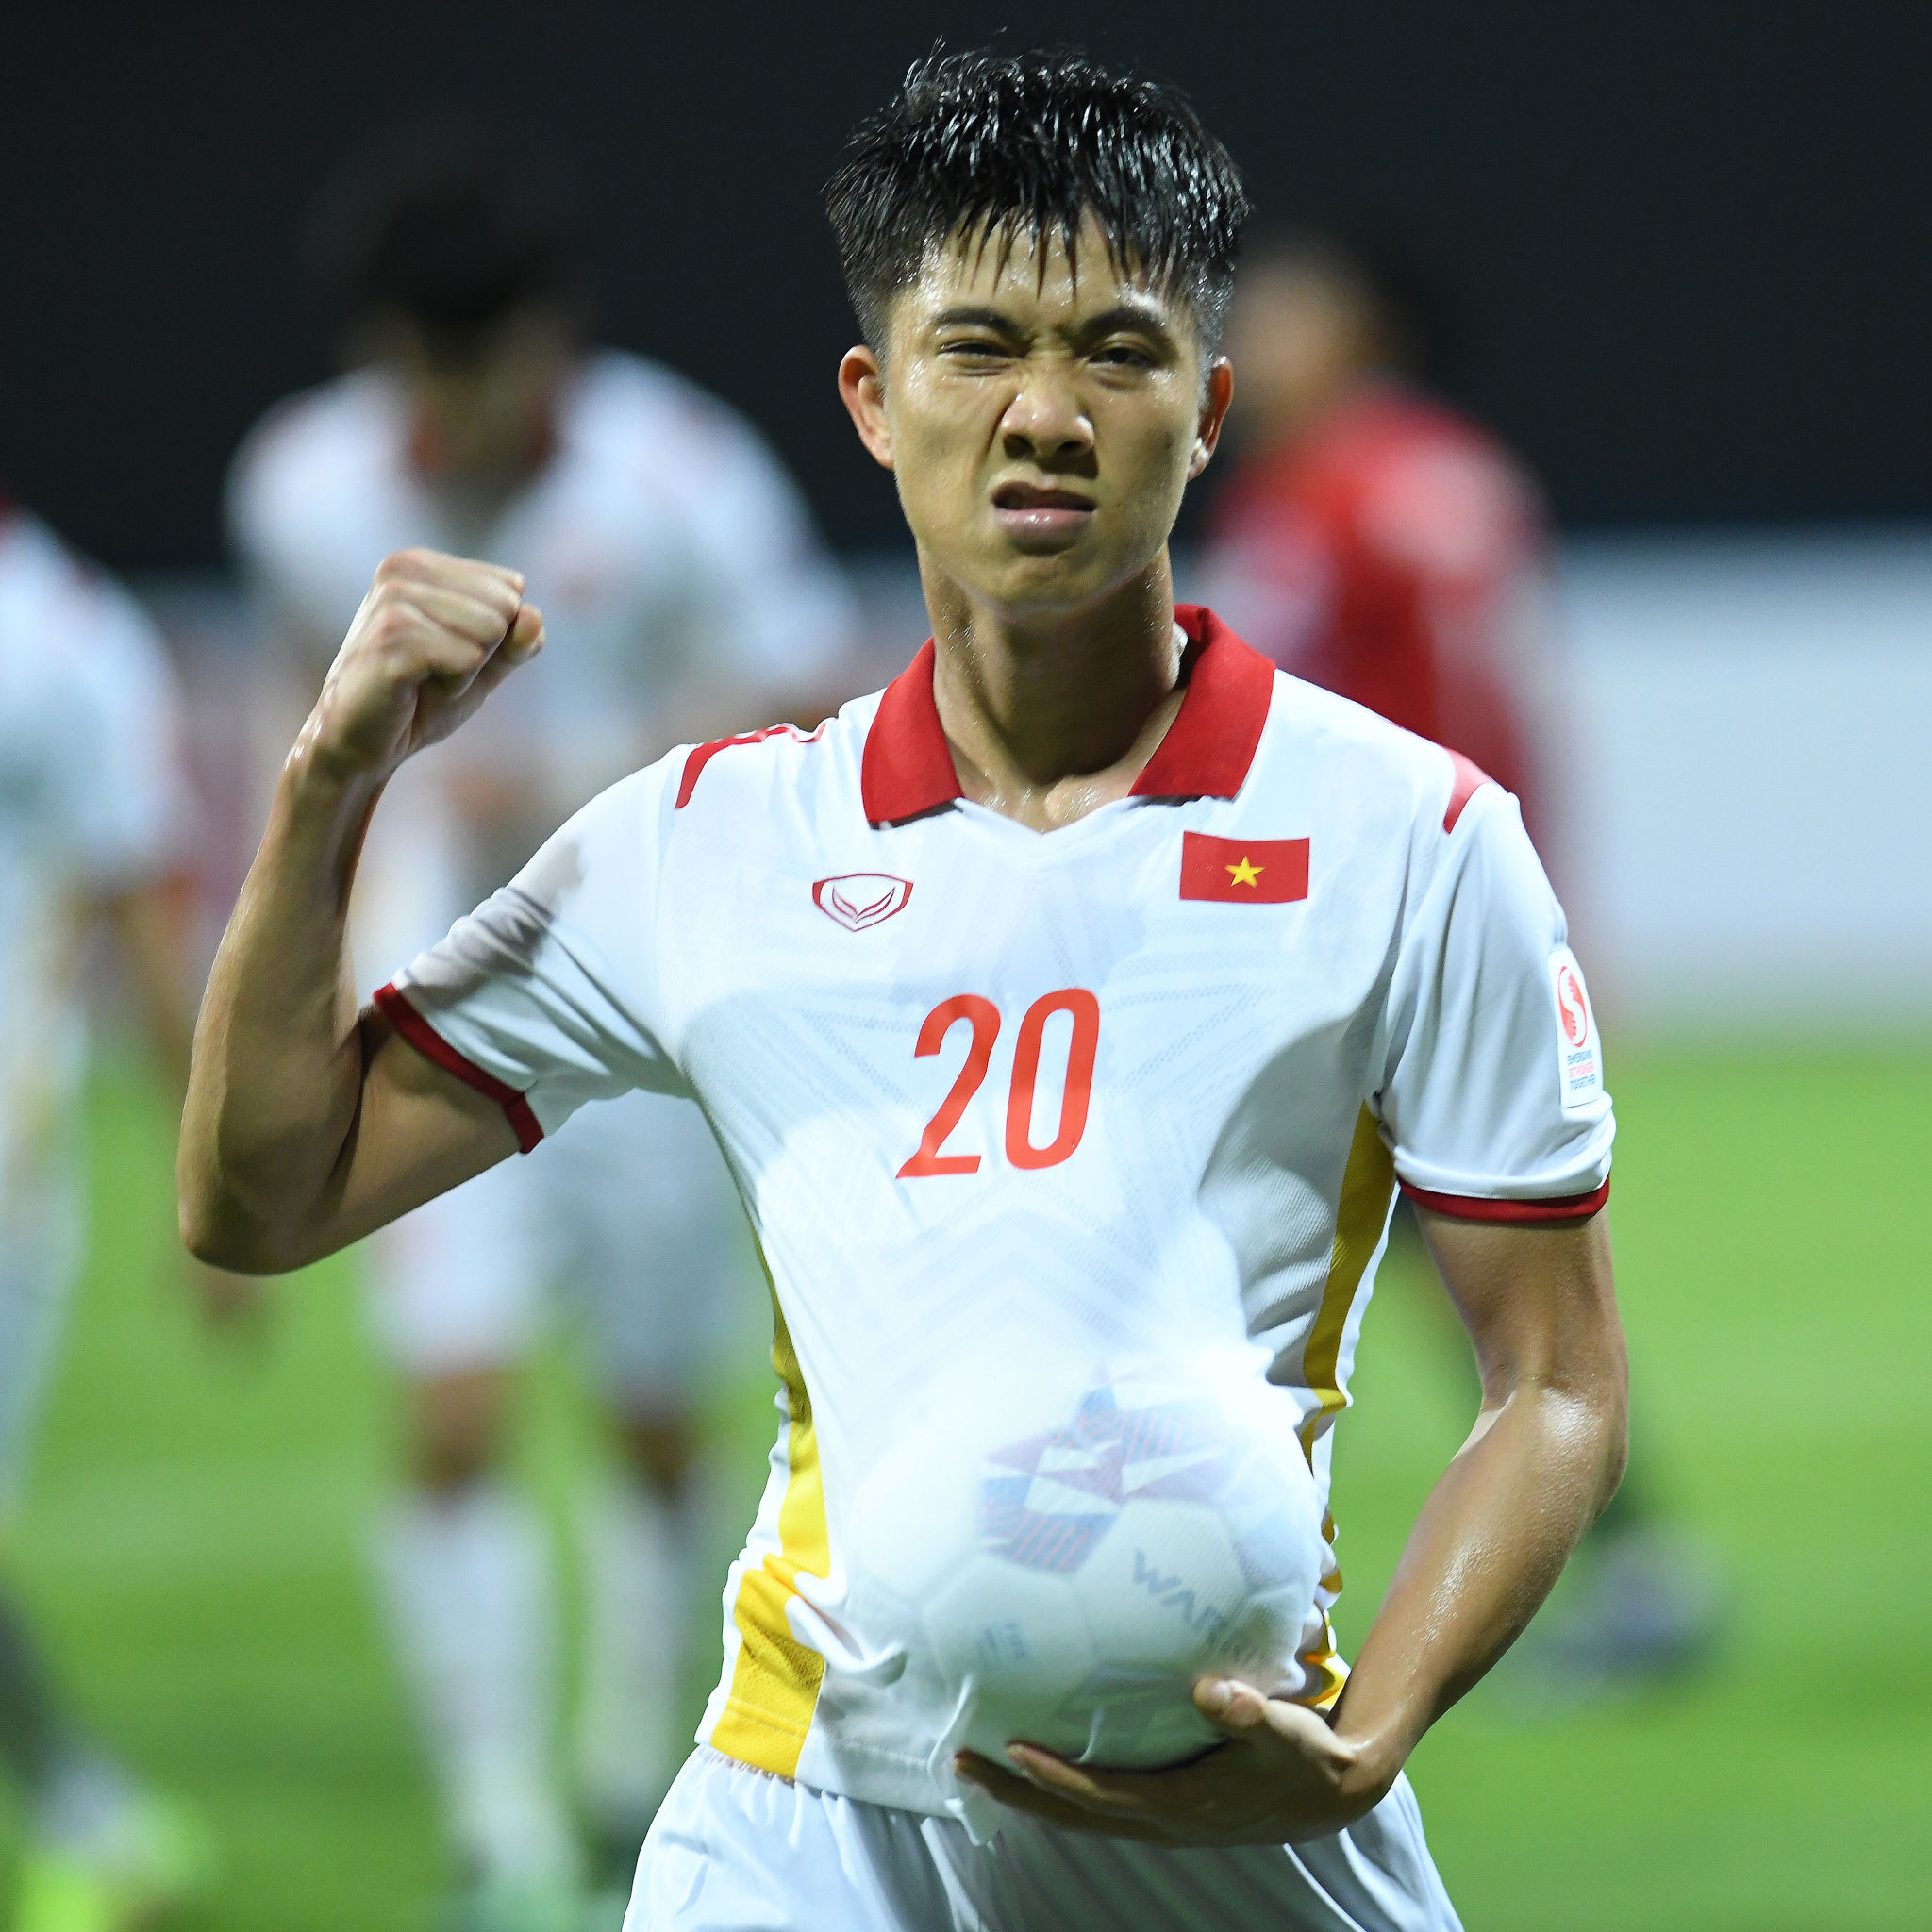 Vietnam’s Phan Van Duc celebrates a goal during their opening match against Laos in Group B of the 2020 AFF Suzuki Cup in Singapore, December 6, 2021. Photo: Getty Images